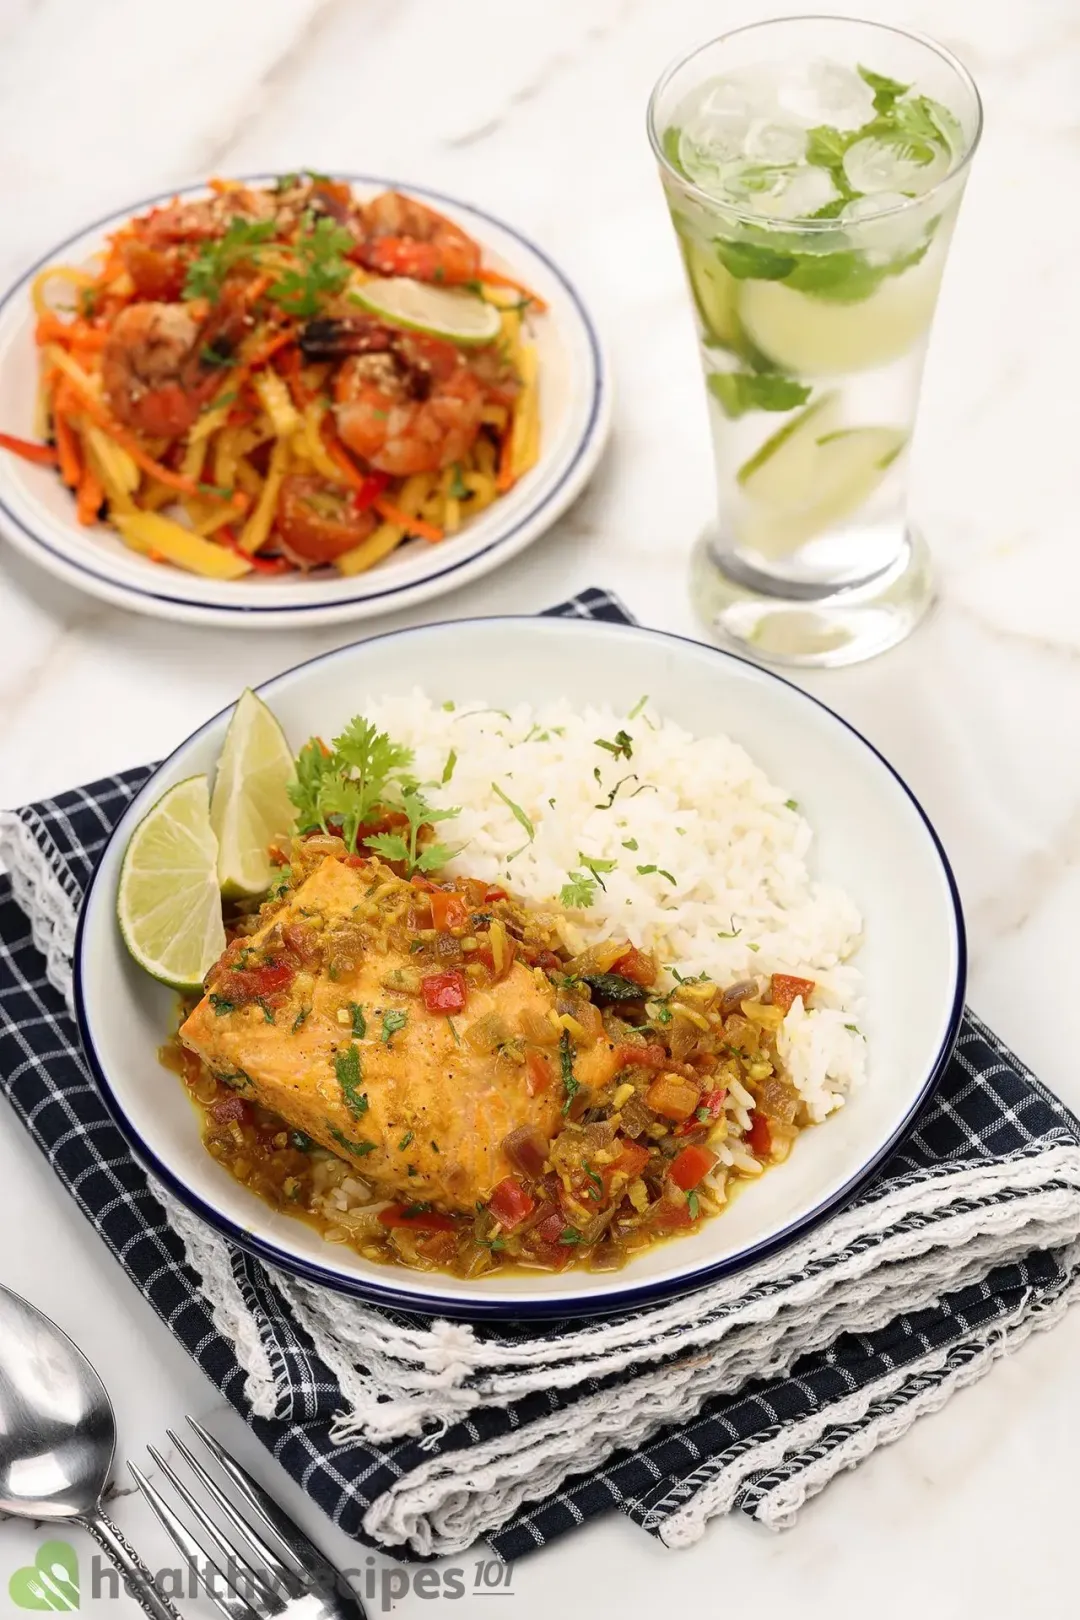 A plate of salmon curry and white rice laid on a dark blue tablecloth next to a glass of lime juice and some Thai salad